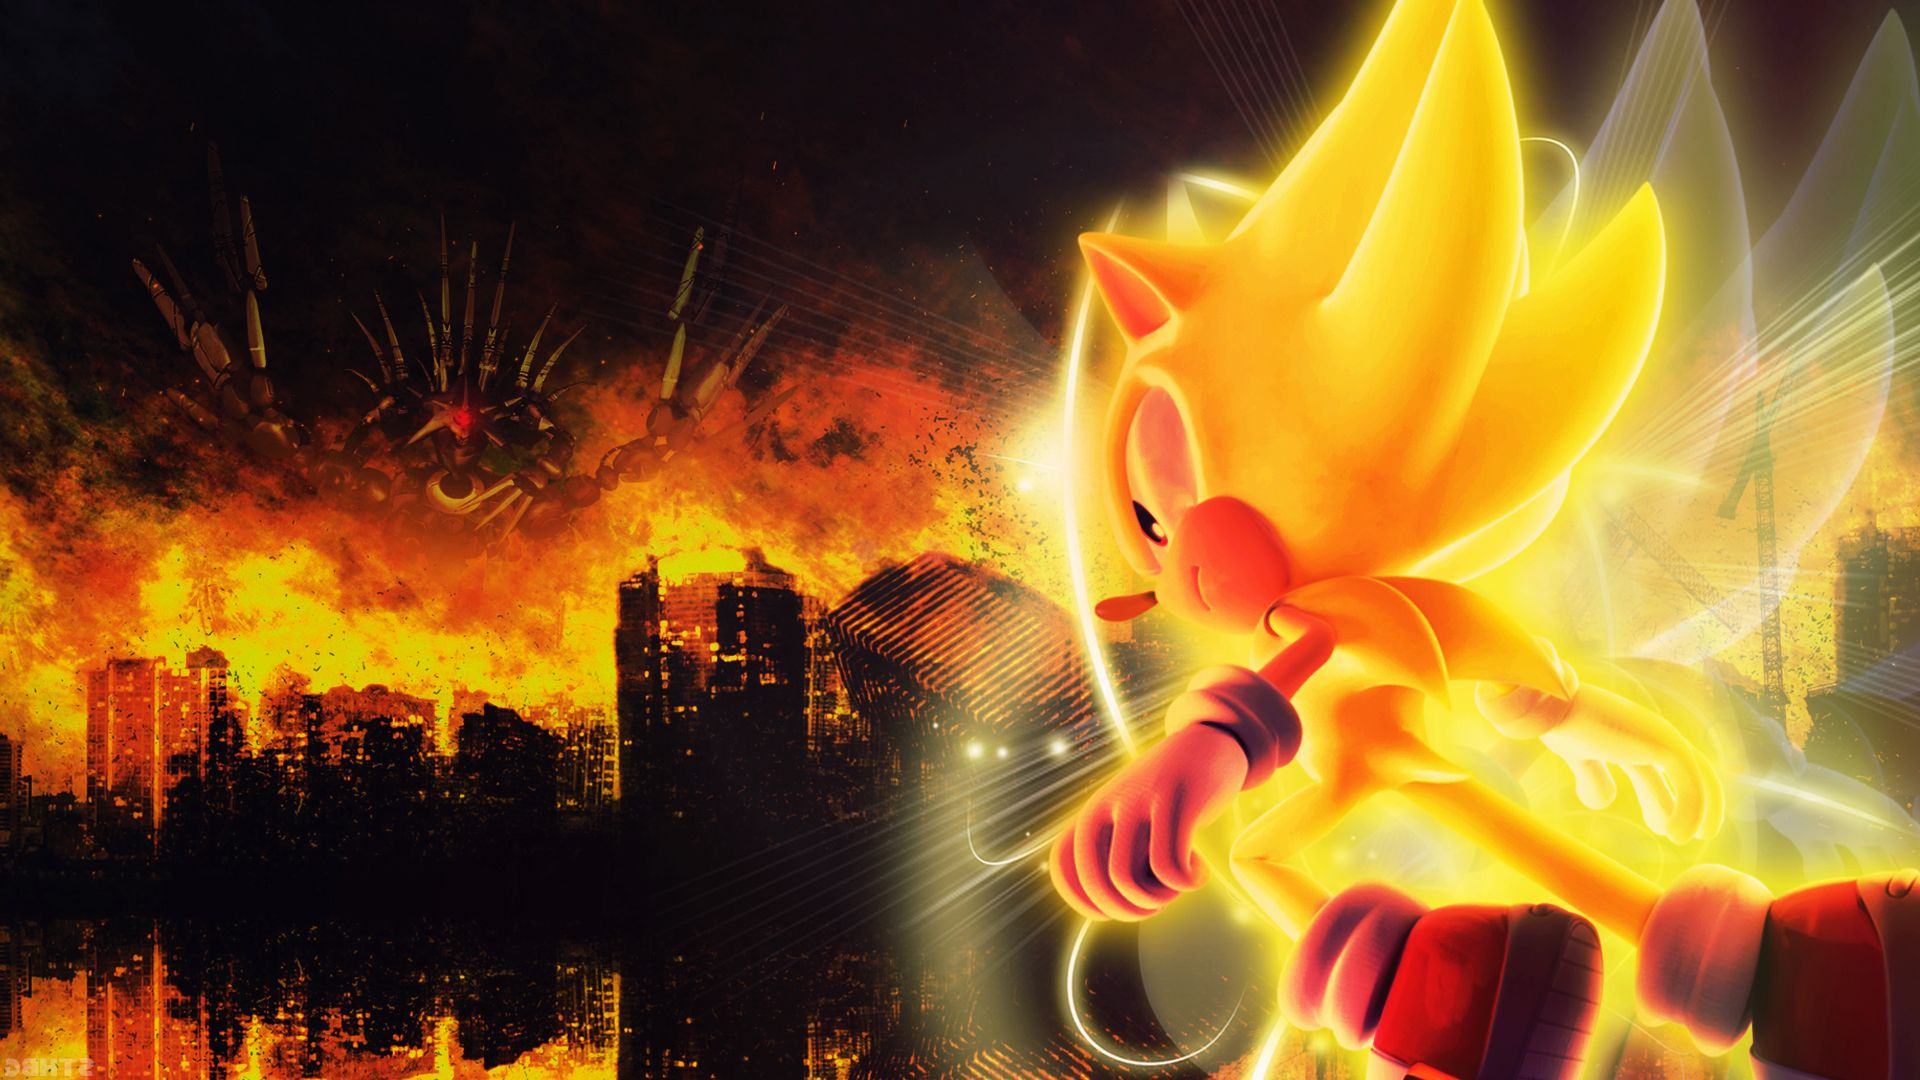 Free download Sonic Wallpaper favourites